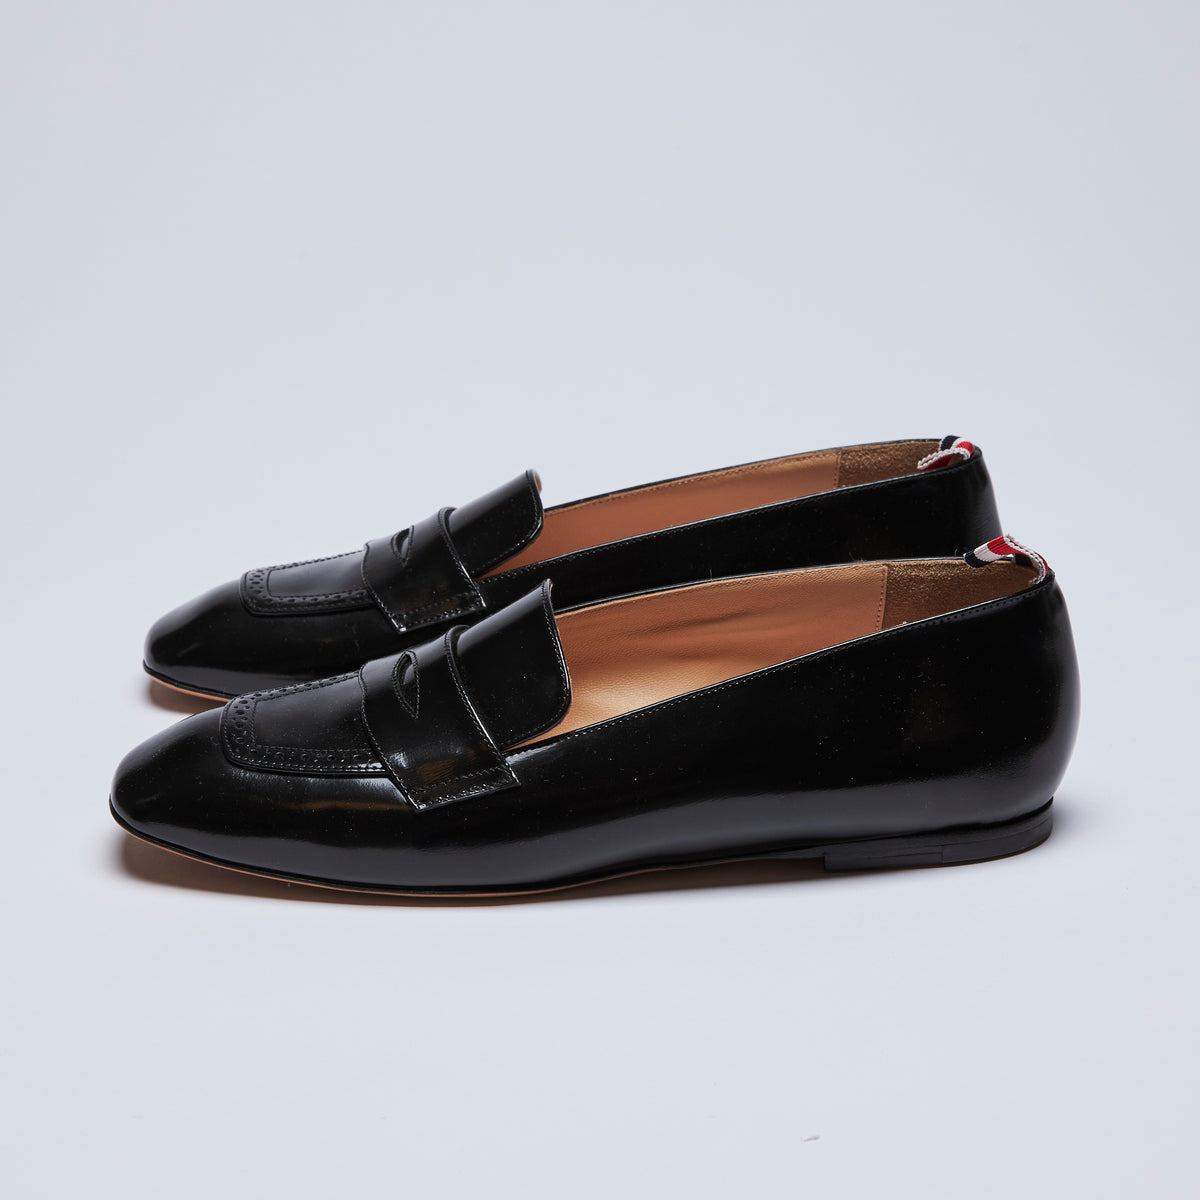 Excellent Pre-Loved Black Shiny Leather Loafers(side)